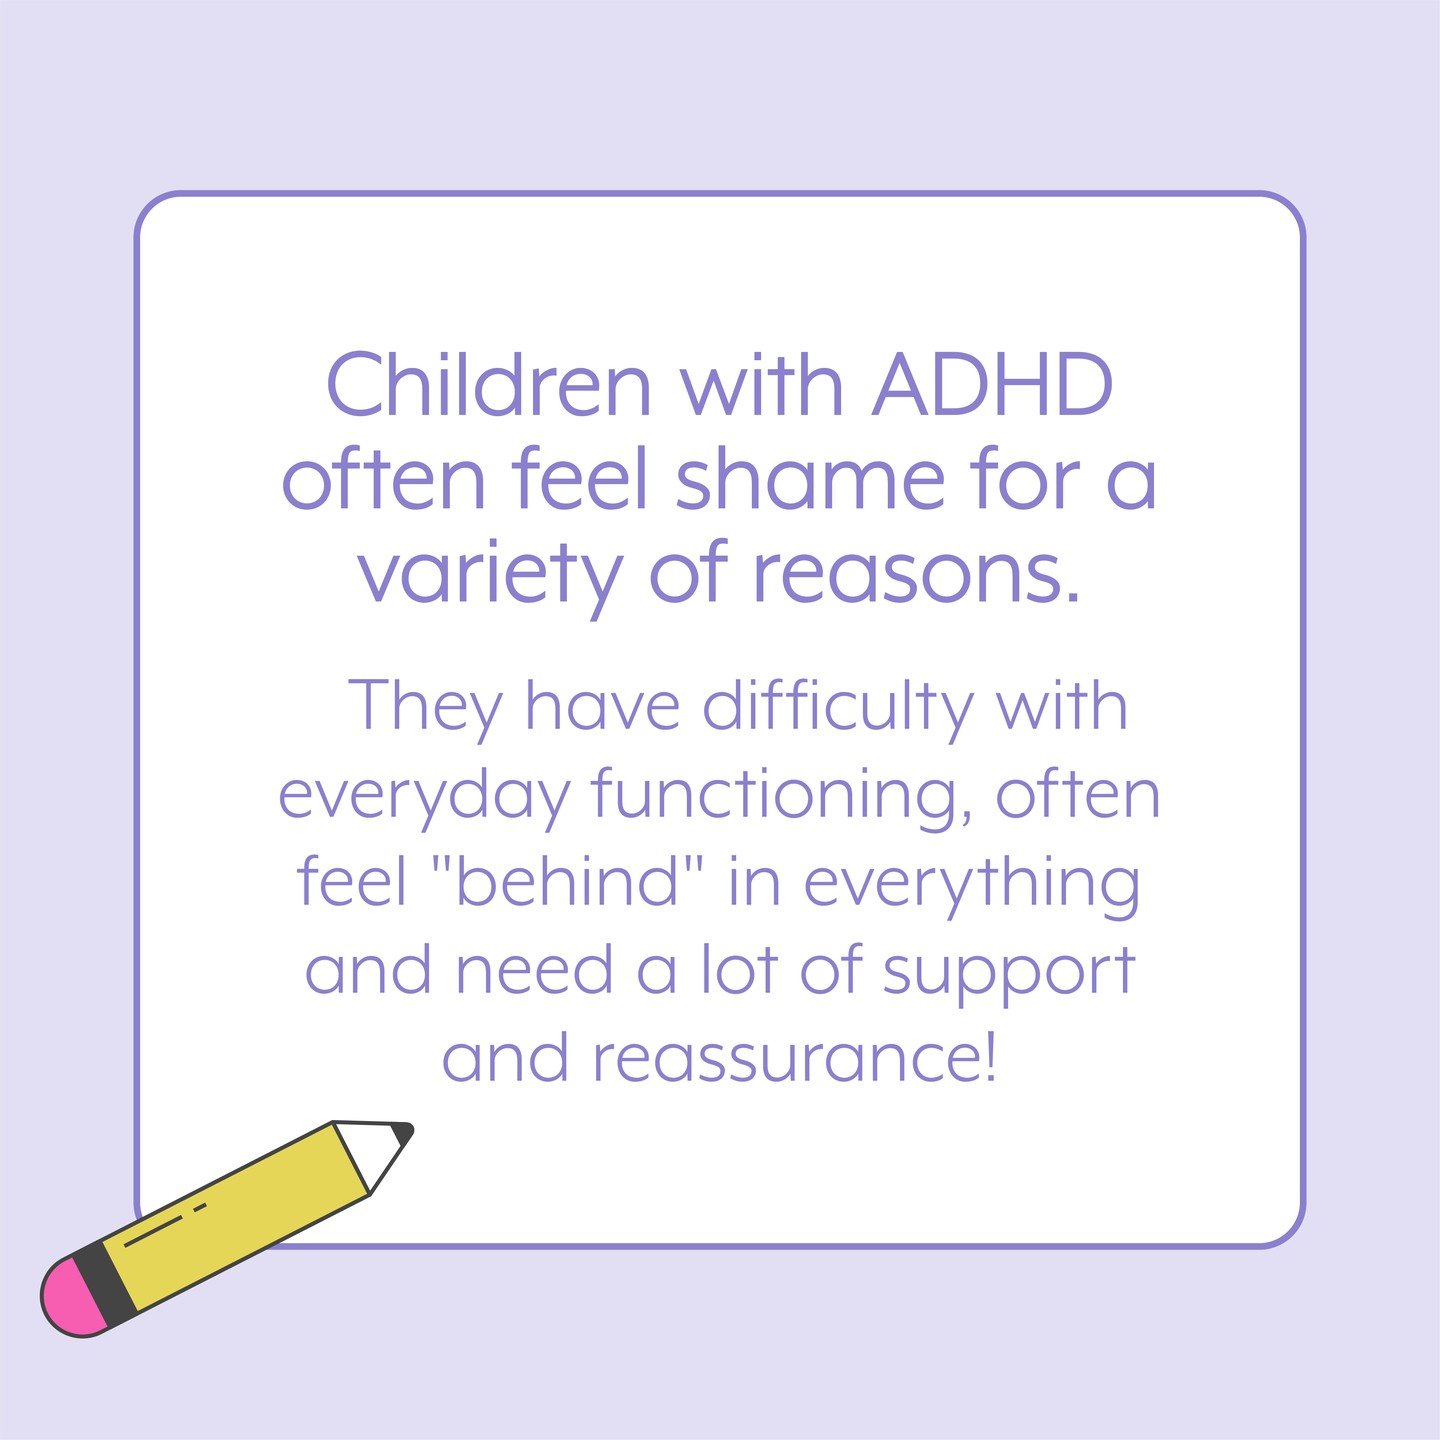 Parents patience is the key for children with ADHD. They don't want to always feel behind or always feel as if they are &quot;in trouble&quot;. These children require support and reassurance that they can acquire the skills needed to feel successful.